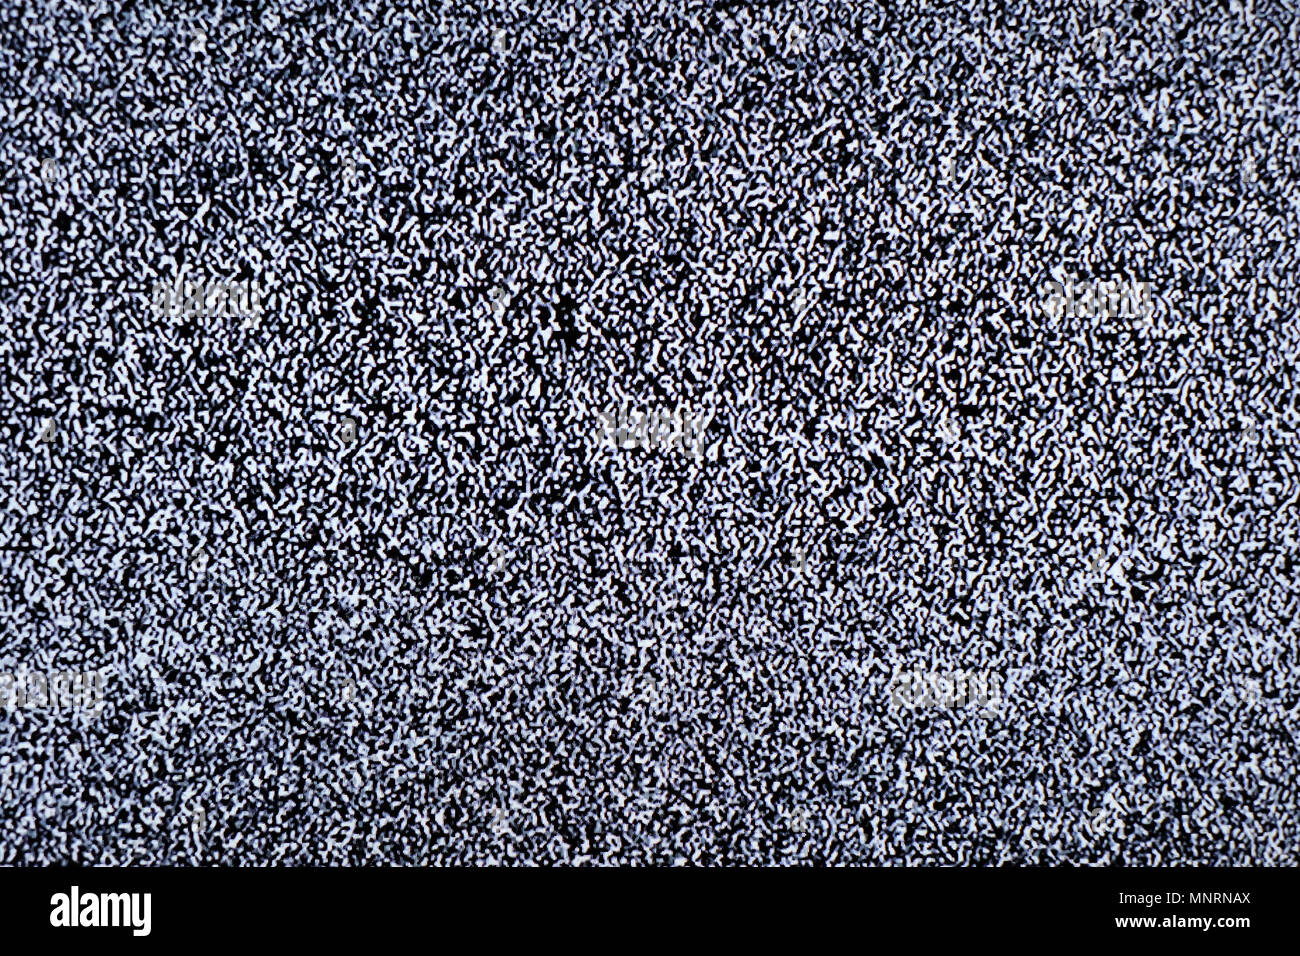 Television screen with static noise caused by bad signal reception or no signal. Abstract background. Stock Photo